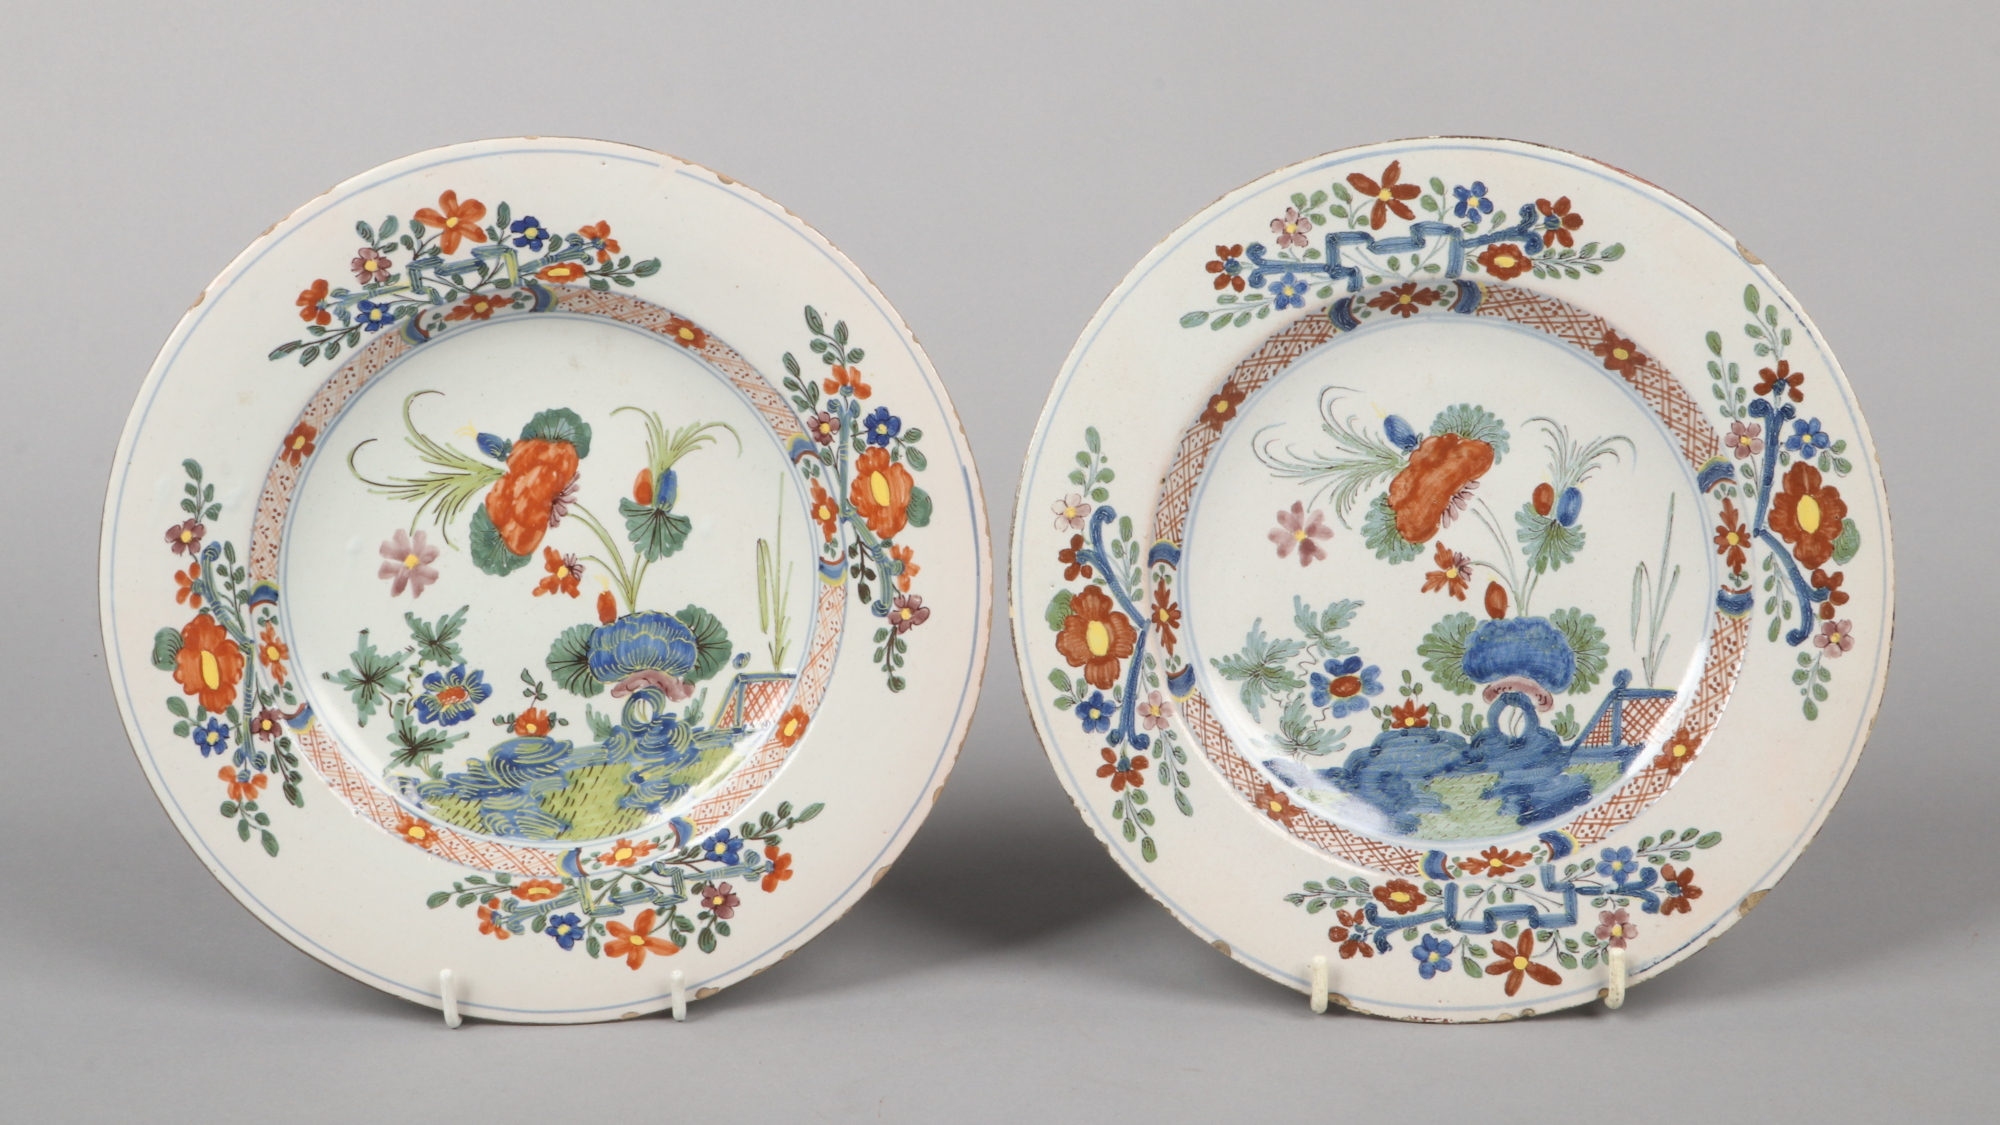 A pair of 18th century polychrome Delft plates, possibly London. Each painted with a garden